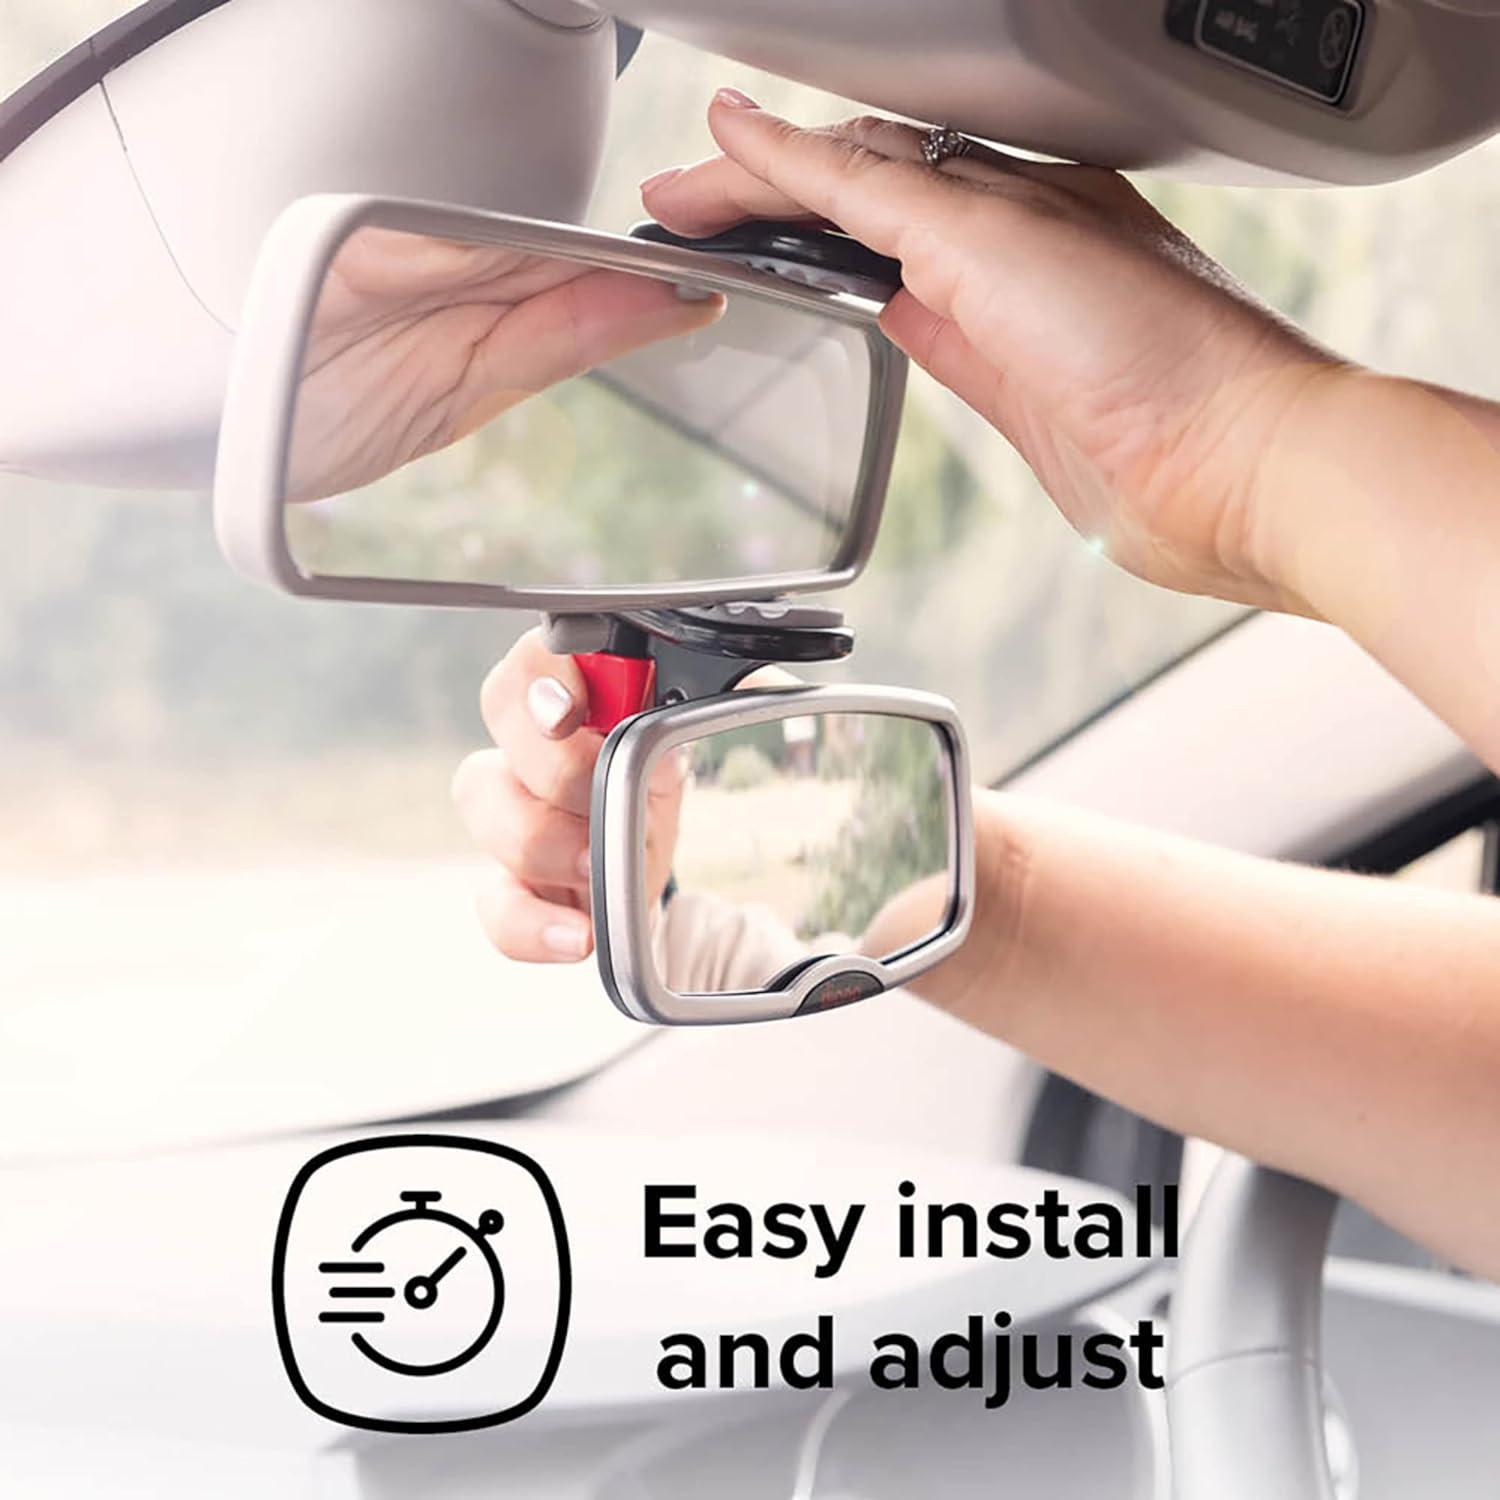 See Me Too Adjustable Silver Baby Car Mirror for Full Backseat View